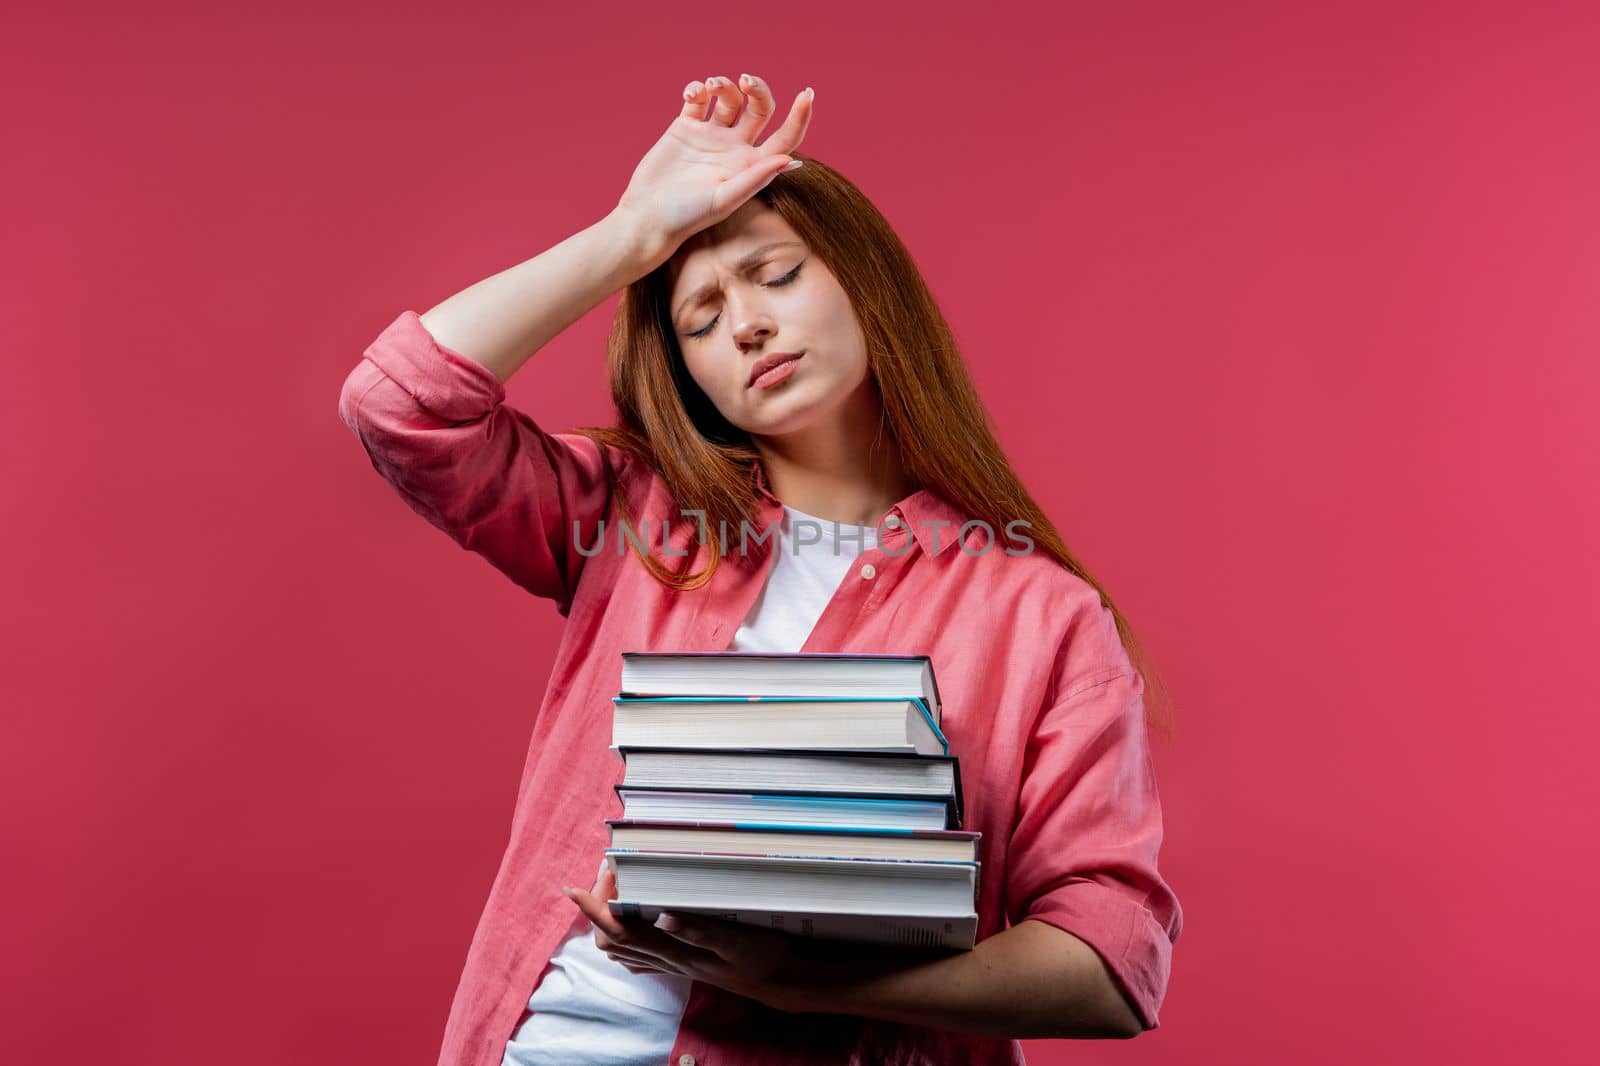 Lazy schoolgirl or student is dissatisfied with amount of books homework on pink background. Girl with long hair in displeasure, she is annoyed, discouraged frustrated by studies by kristina_kokhanova